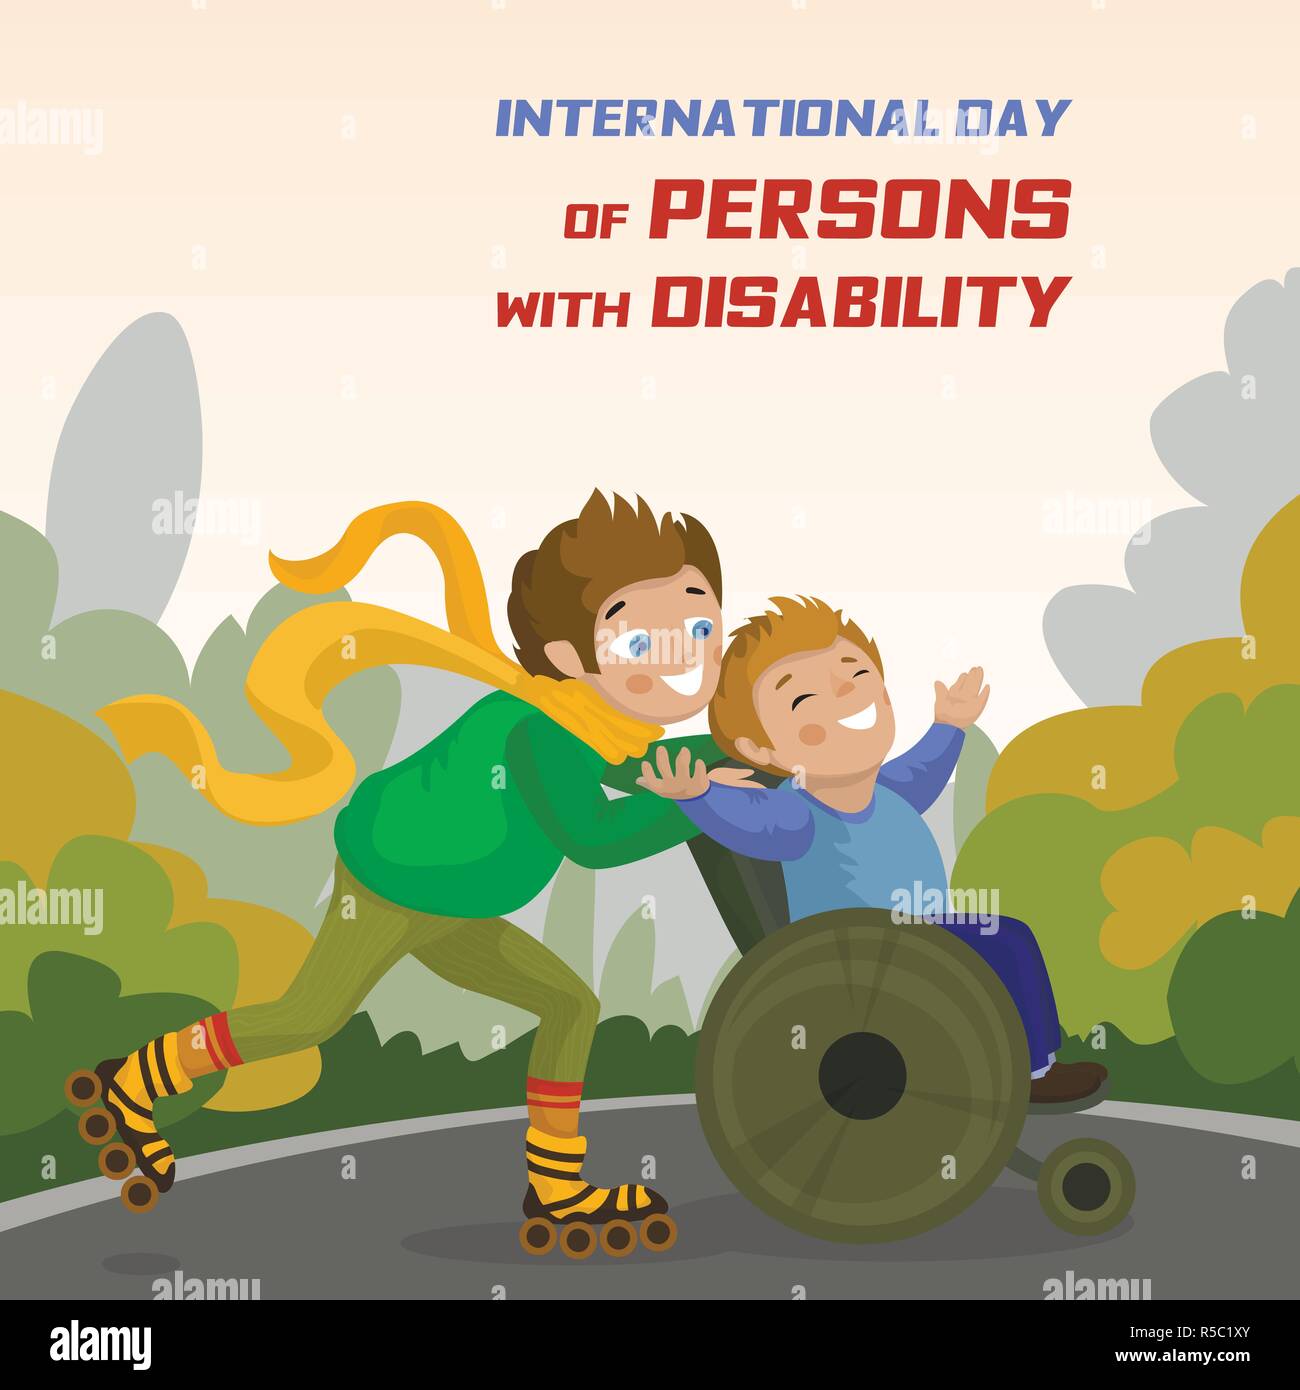 International day of persons with disability concept background. Cartoon illustration of international day of persons with disability vector concept background for web design Stock Vector